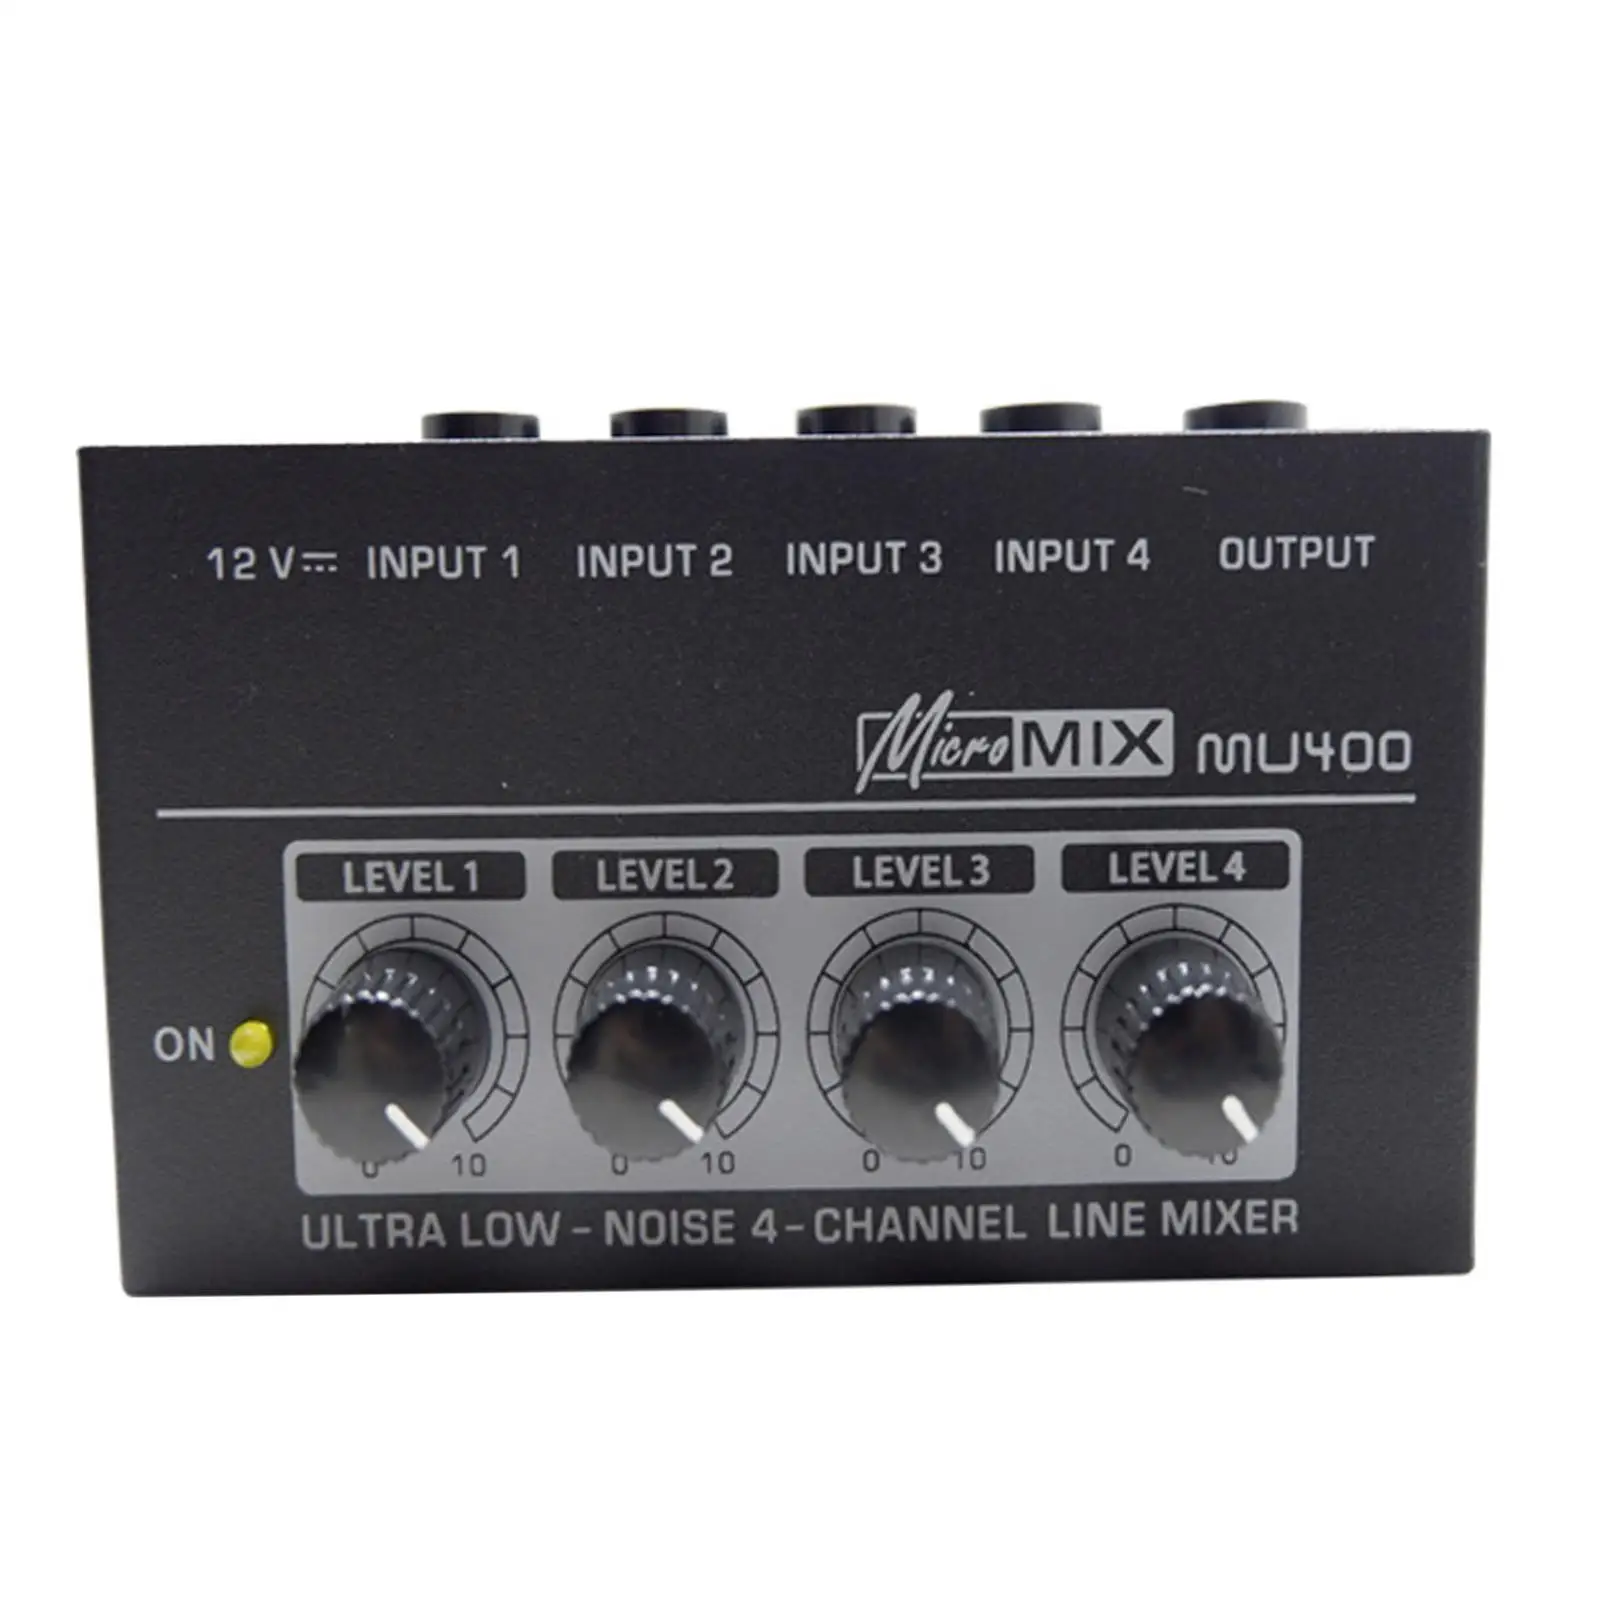 Mini Audio Mixer 12V Portable Mixer for Computer Guitars Bass Keyboards Mixer Studio Stage Mixing Instrument Small Clubs or Bars